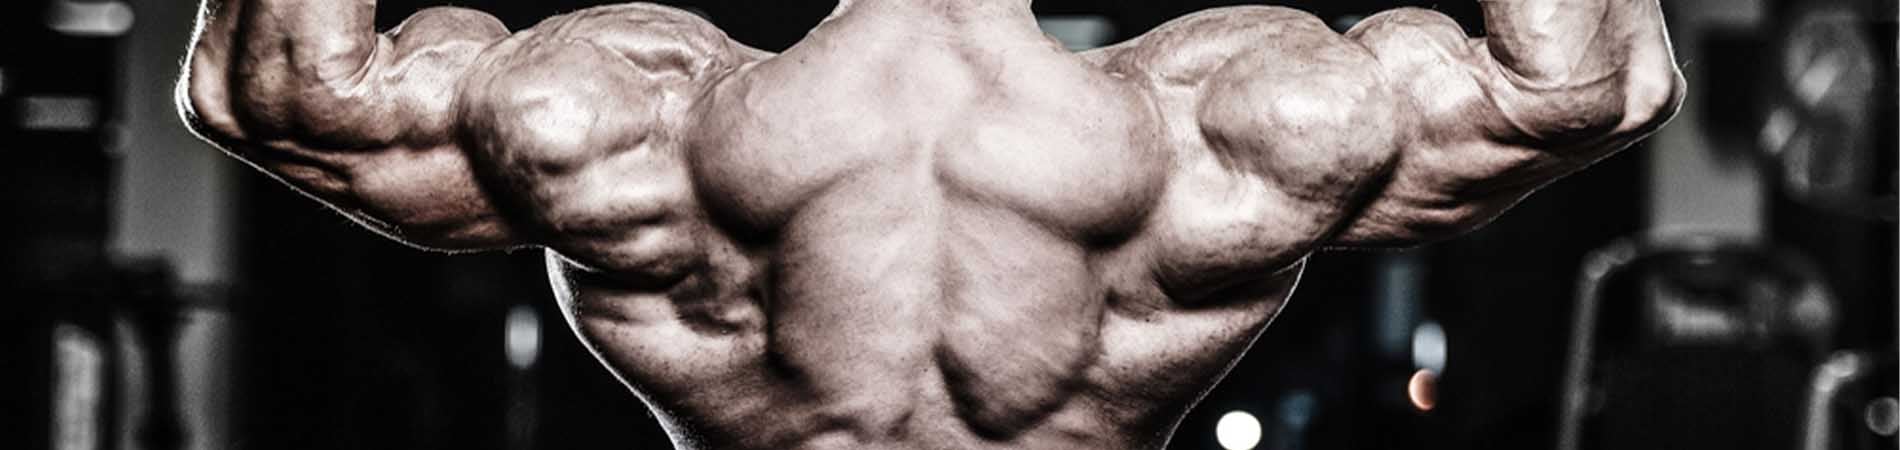 Blog 25 Lats and Pecs When Getting Older